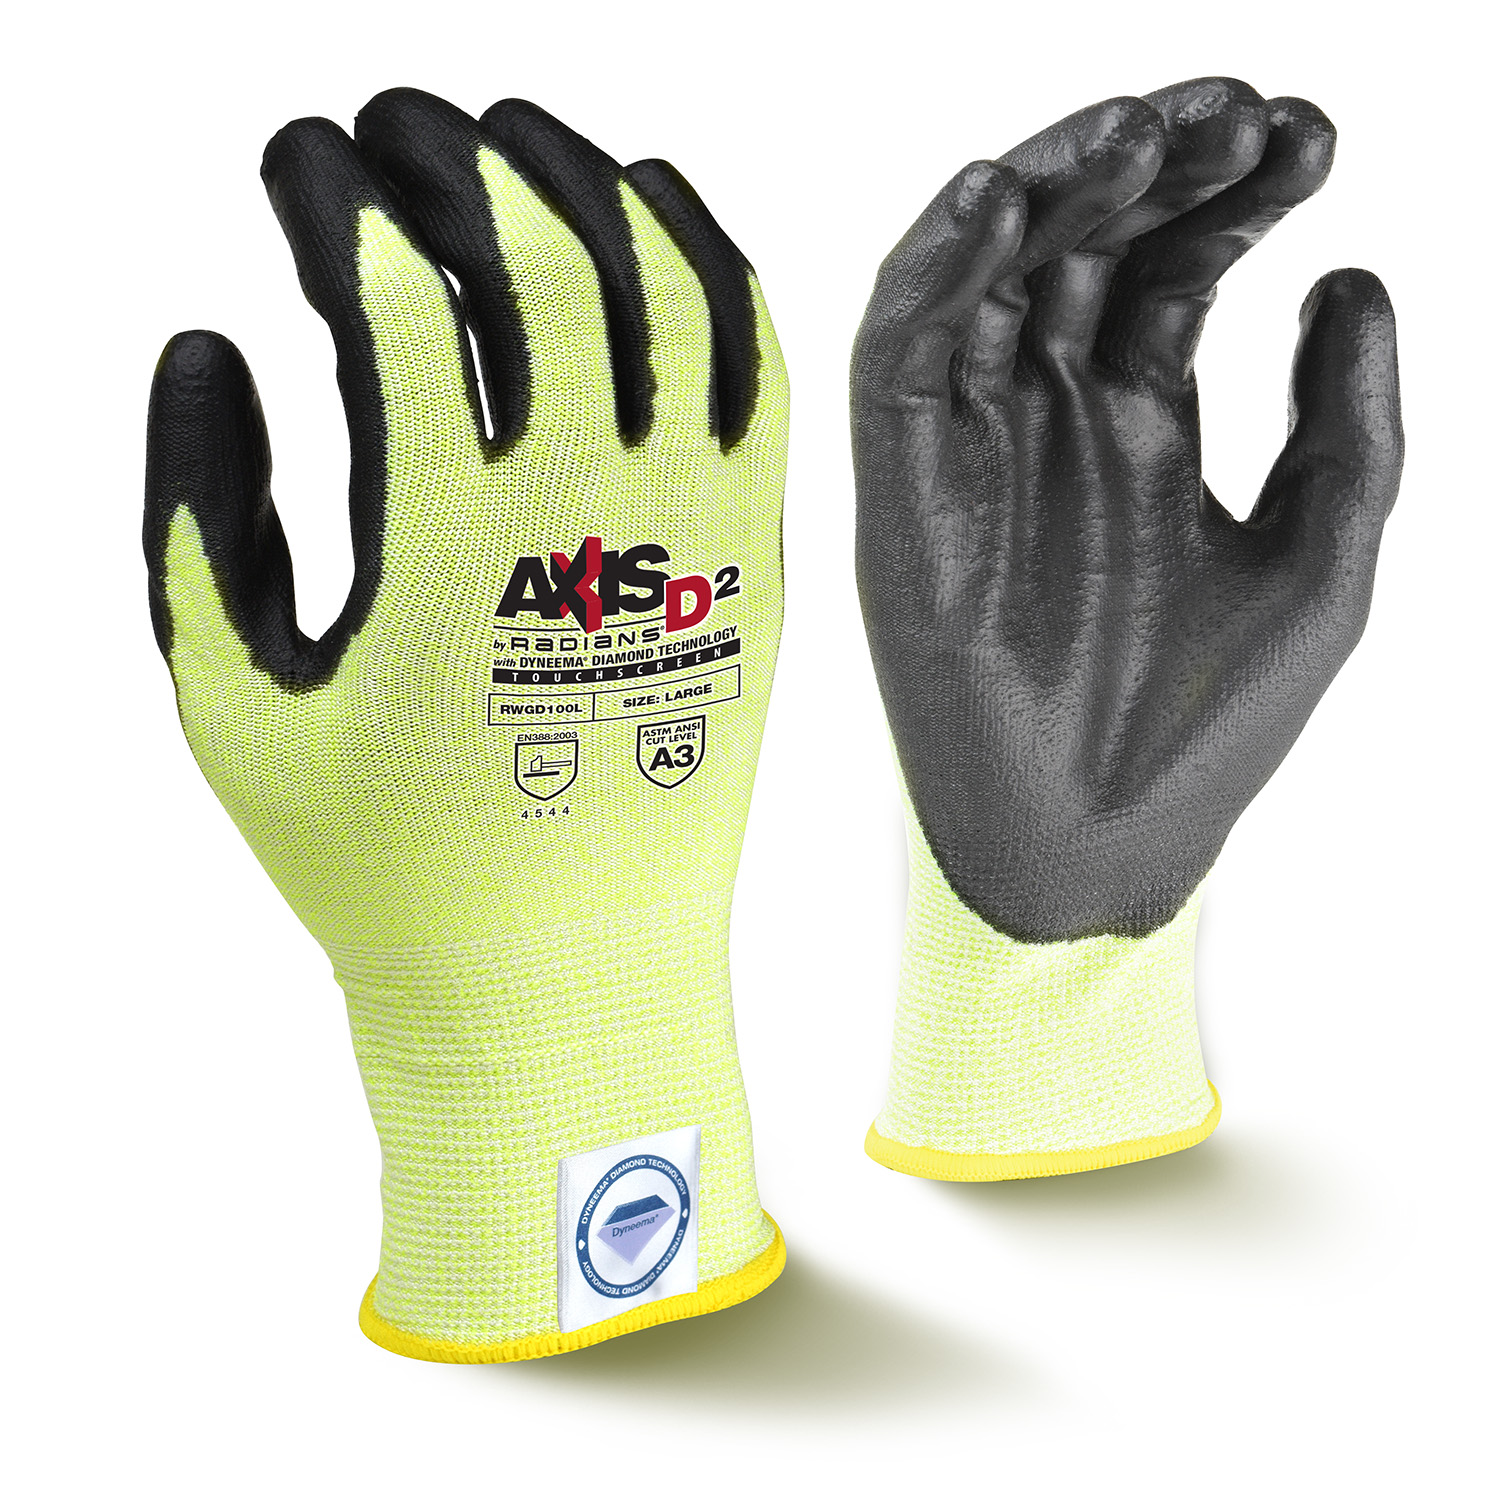 RWGD100 AXIS D2™ Dyneema® Cut Protection Level A3 Touchscreen Glove - Size L - Cut Resistant